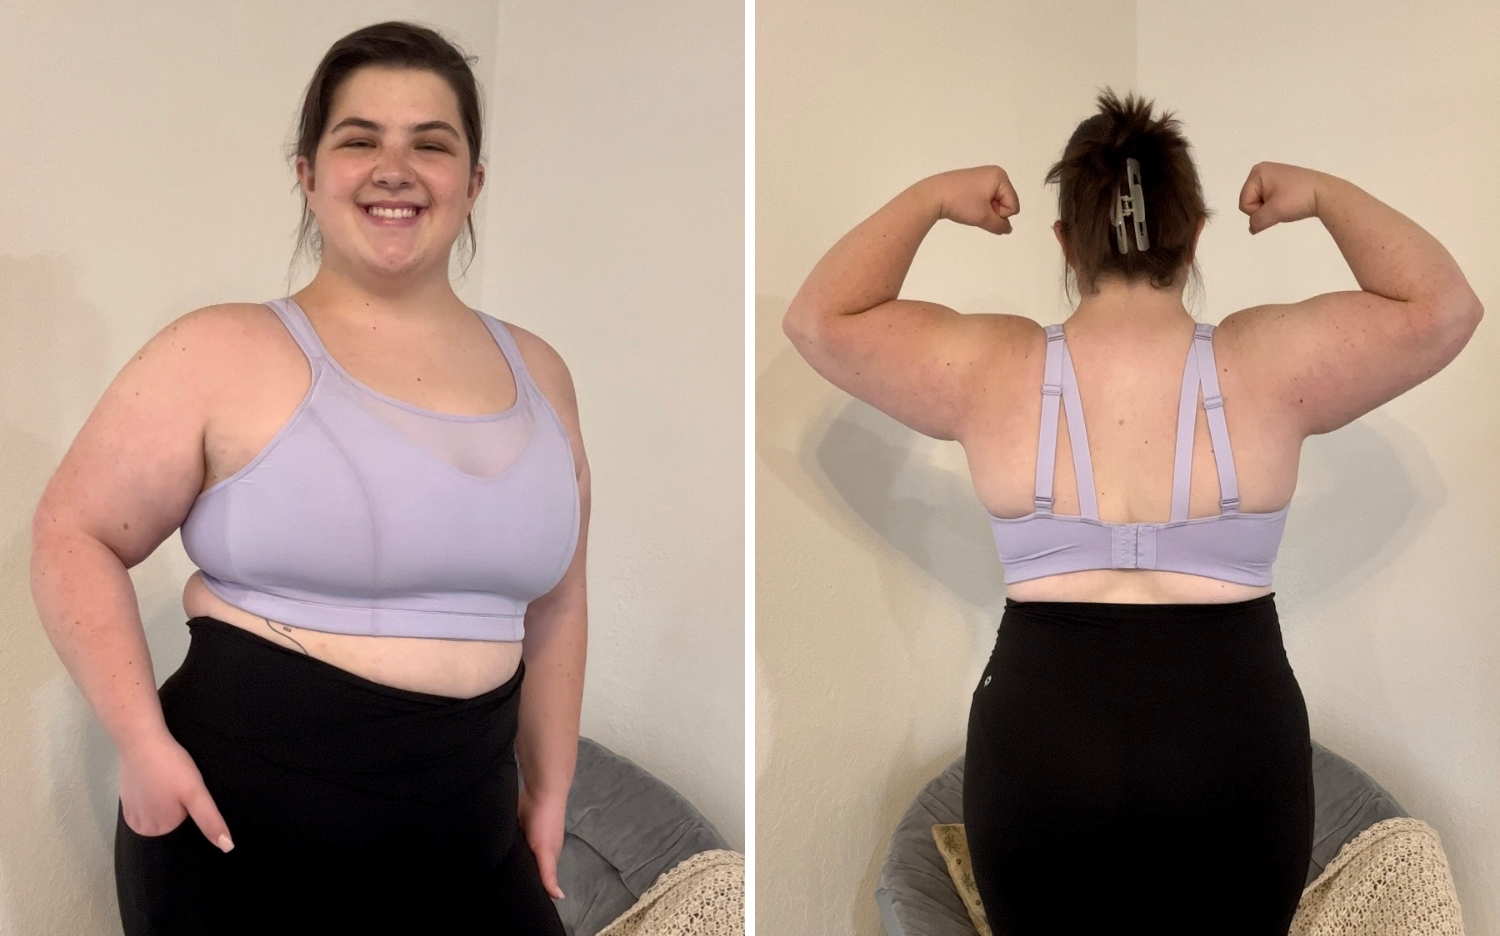 evelyn popflex try on crew superbra review size 2X high impact sports bra